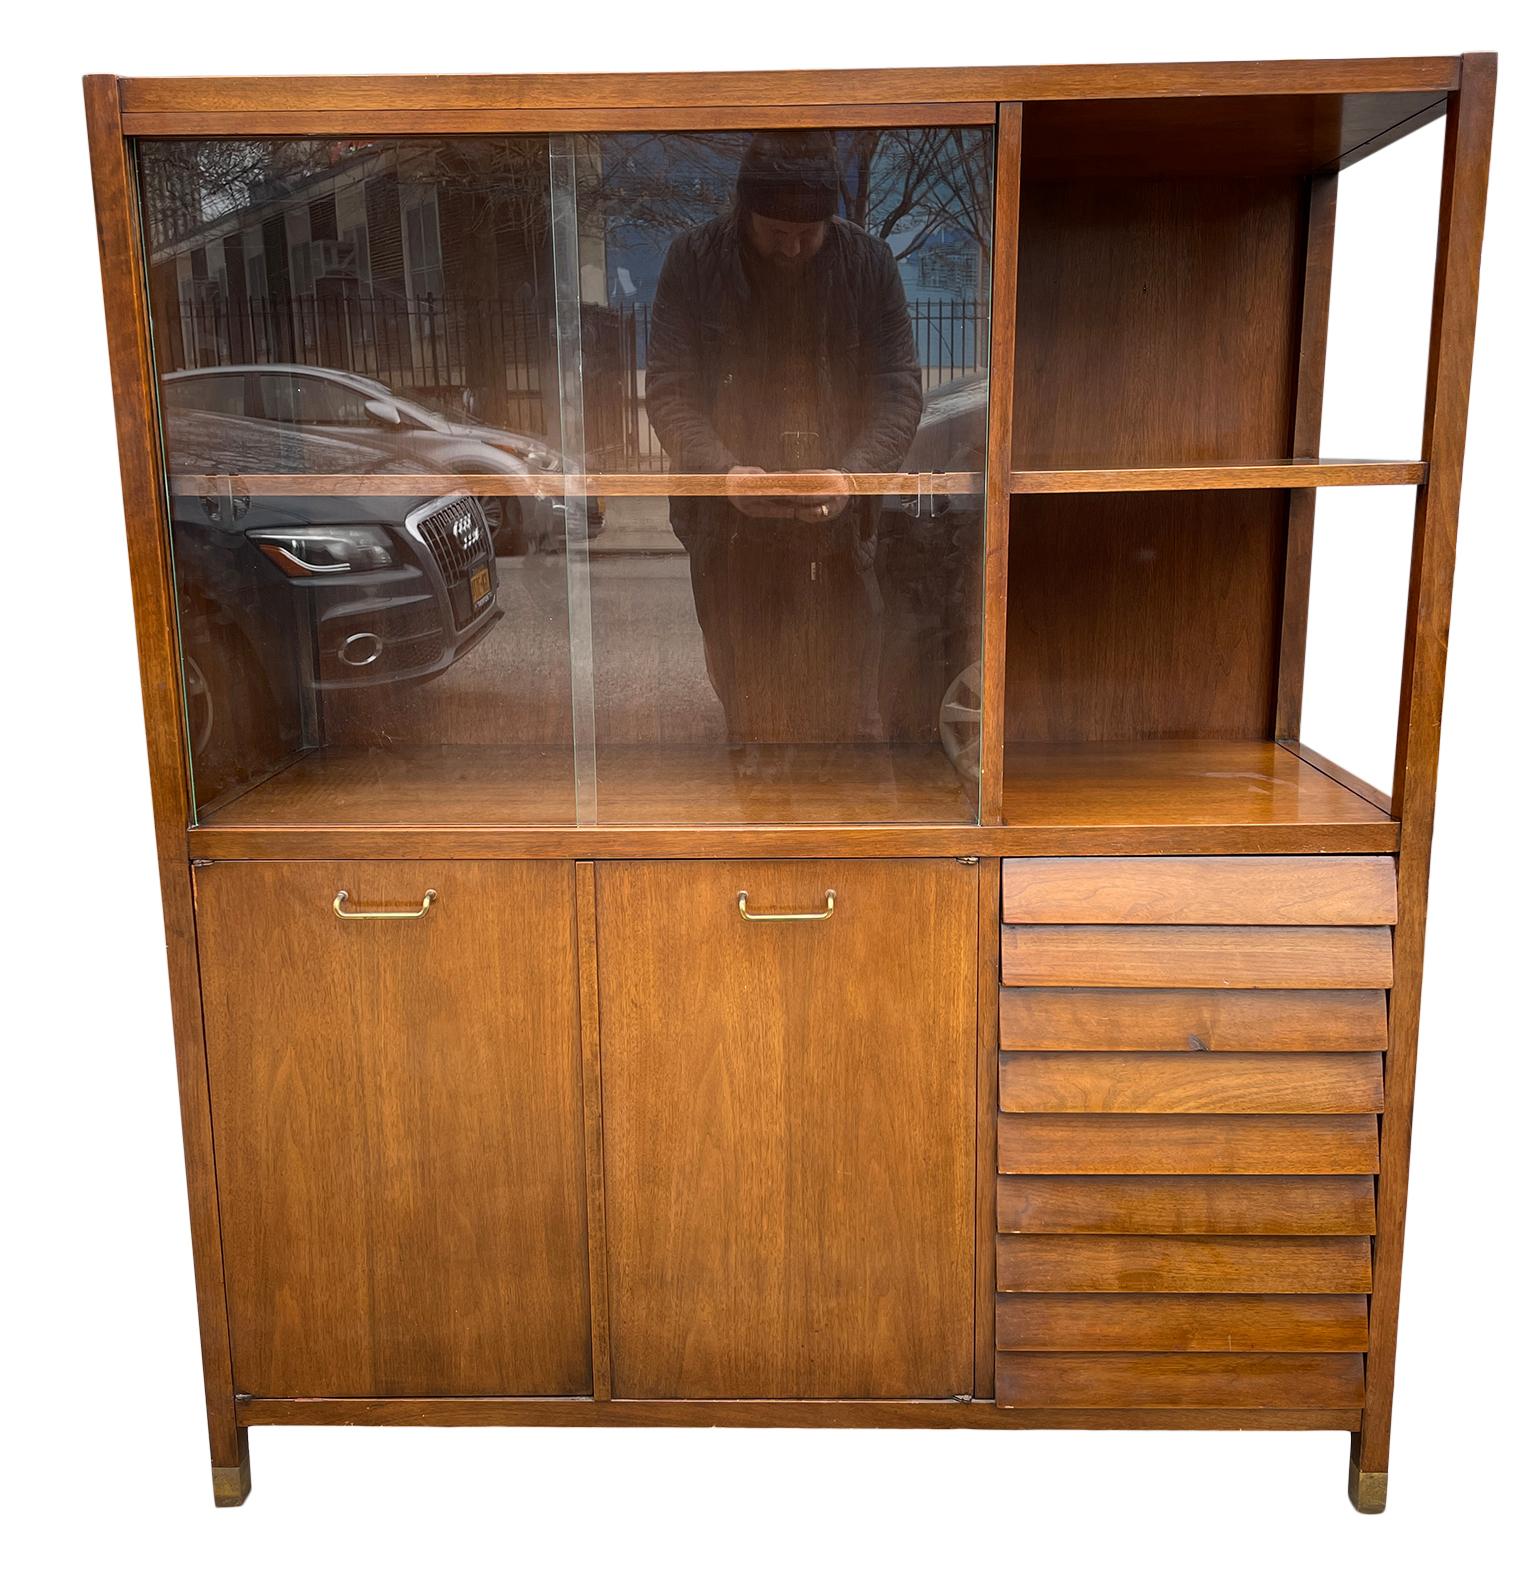 Wall unit cabinet for the Dania Series by Merton Gershun for American of Martinsville. 2 glass sliding doors with lower cabinet and 4 Lou reed drawers on the lower right. Brass handles and feet. Dark walnut finish. Labeled inside drawer. Located in